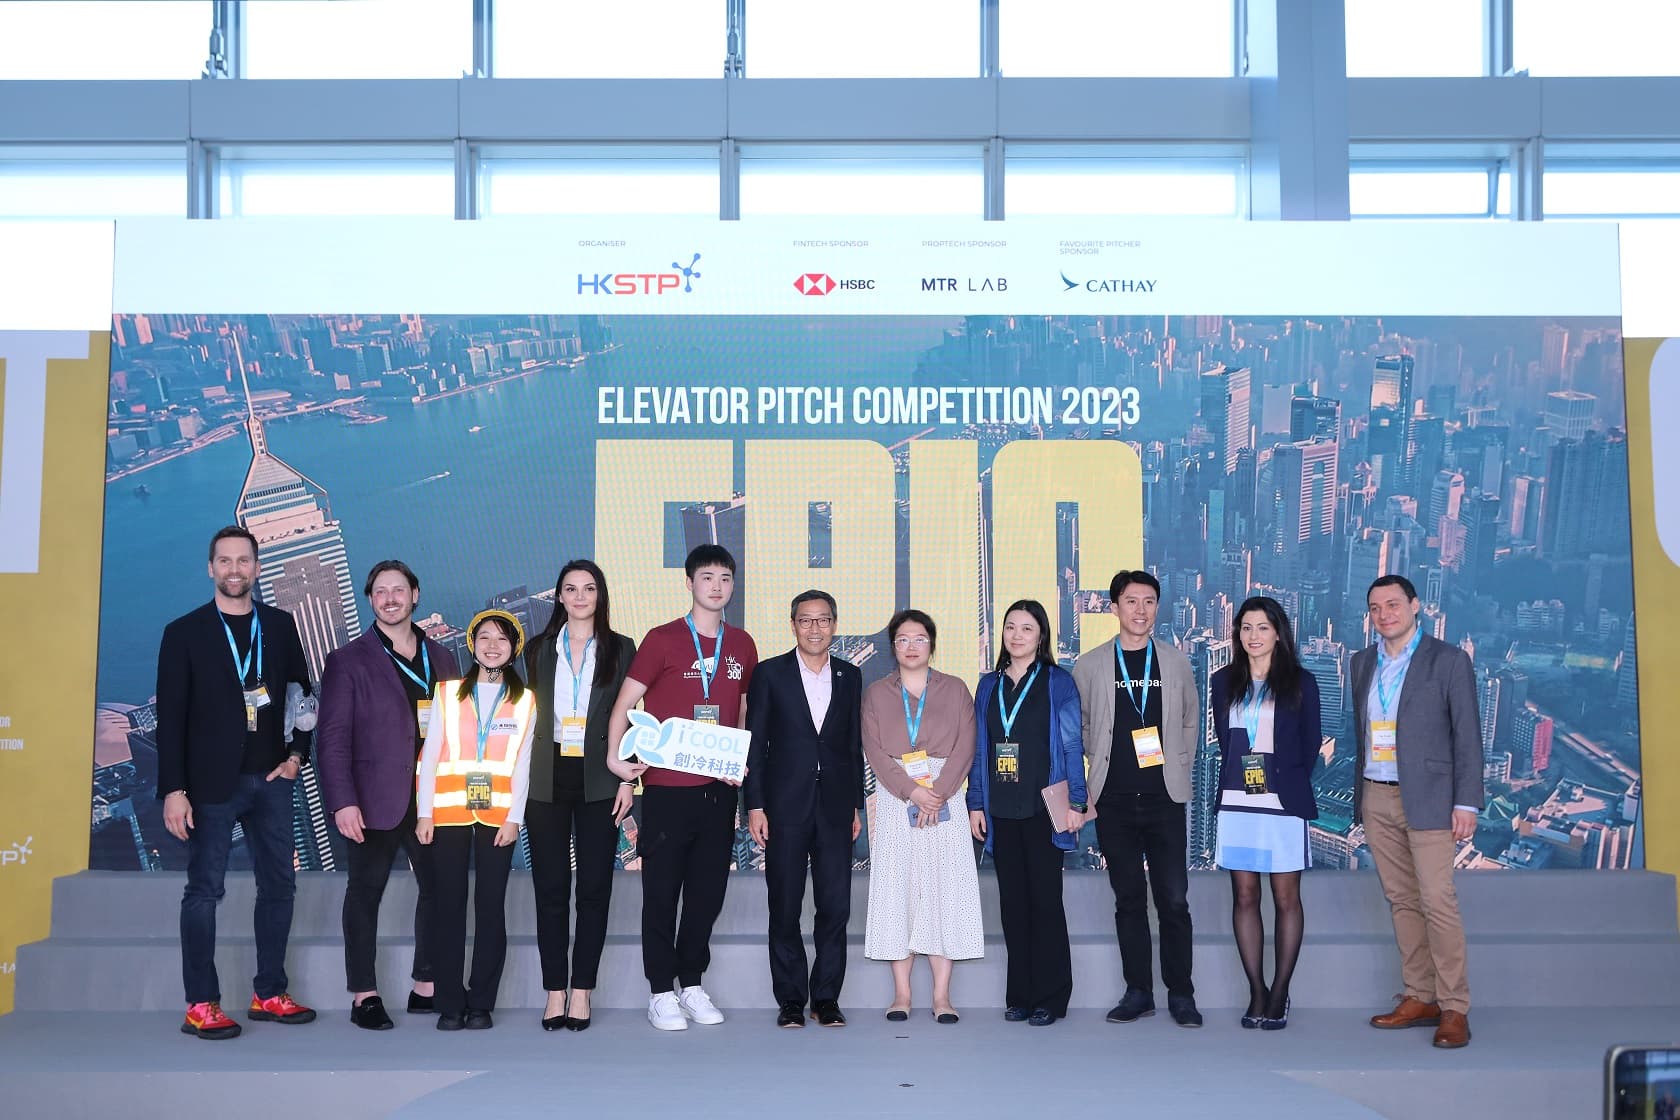 photo1HKSTP CROWNS OVERALL CHAMPION SKYLAND INNOVATION AT EPIC 2023 PITCHING COMPETITION BEATING OVE